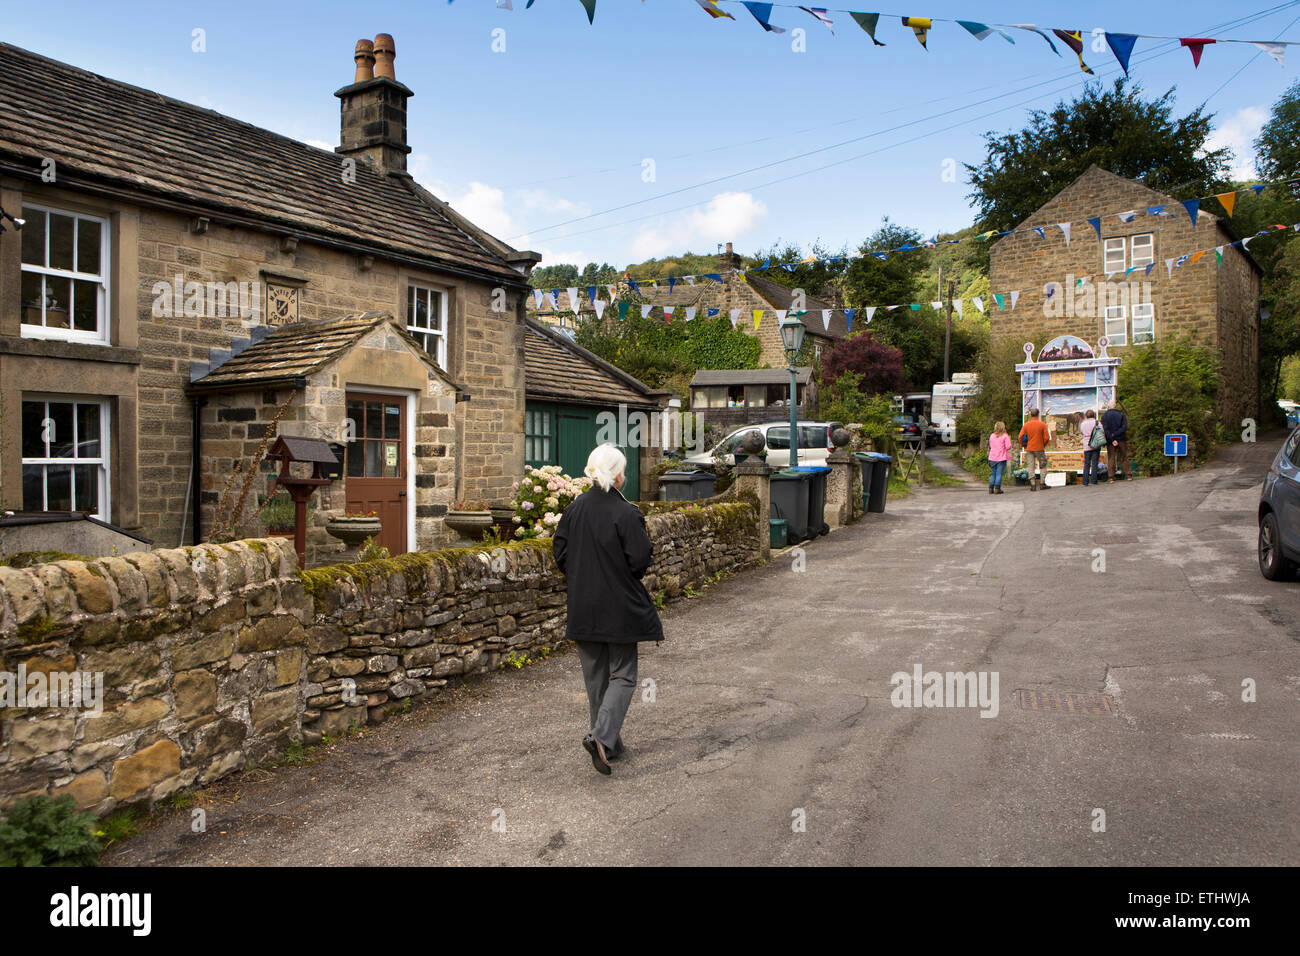 UK, England, Derbyshire, Eyam, Little Edge, visitor walking to see Town Head well dressing Stock Photo